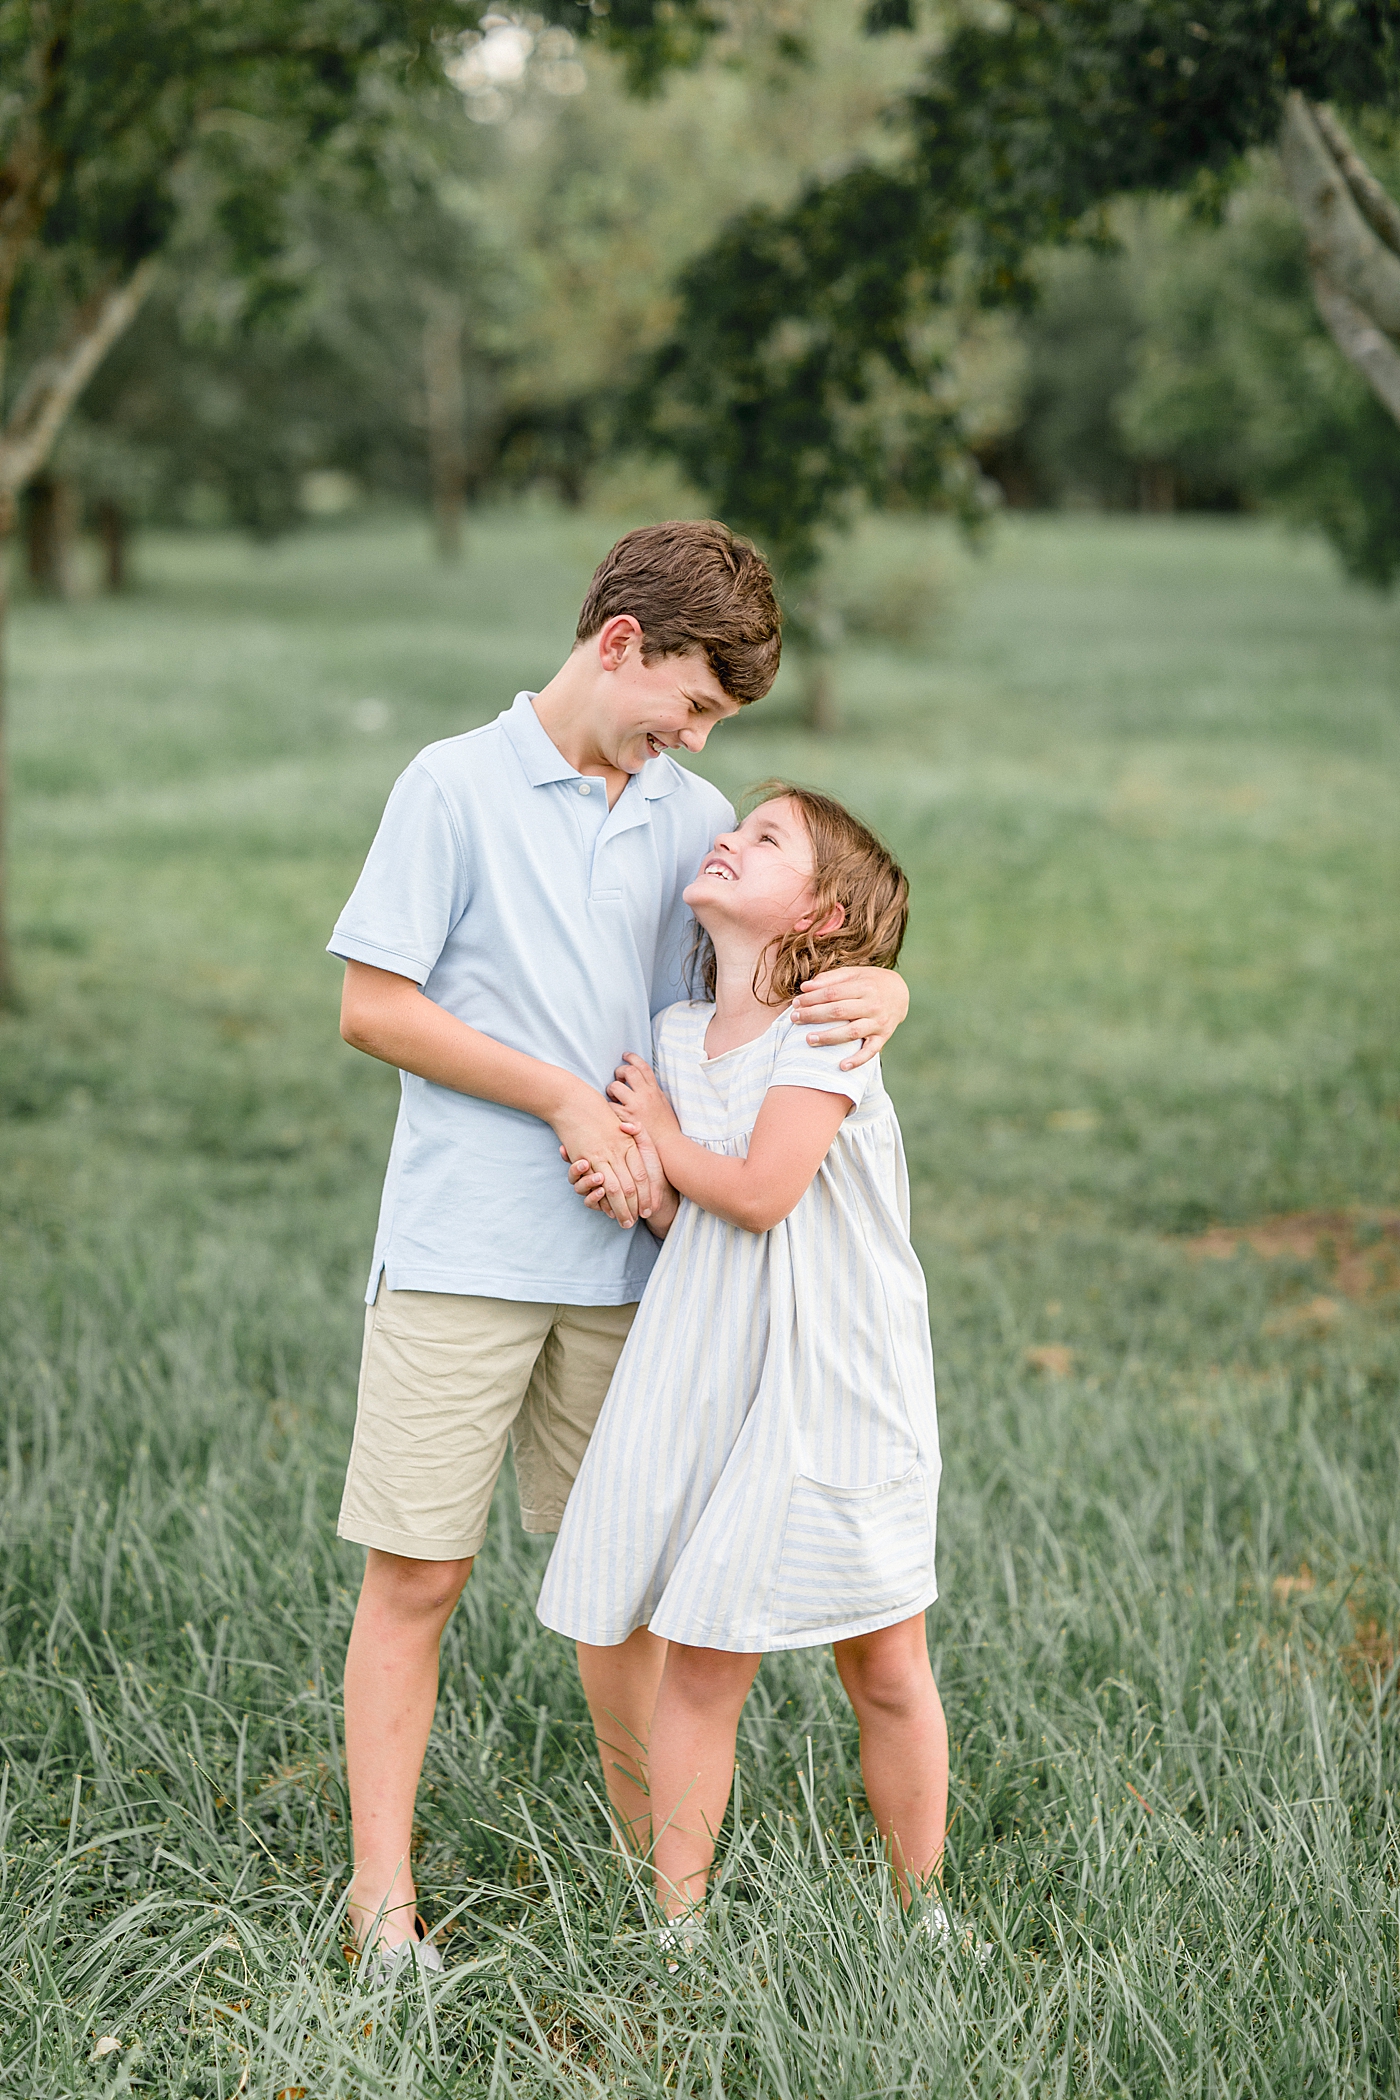 Brother and sister hugging and looking at each other during family photoshoot. Photo by Brittany Elise Photography.